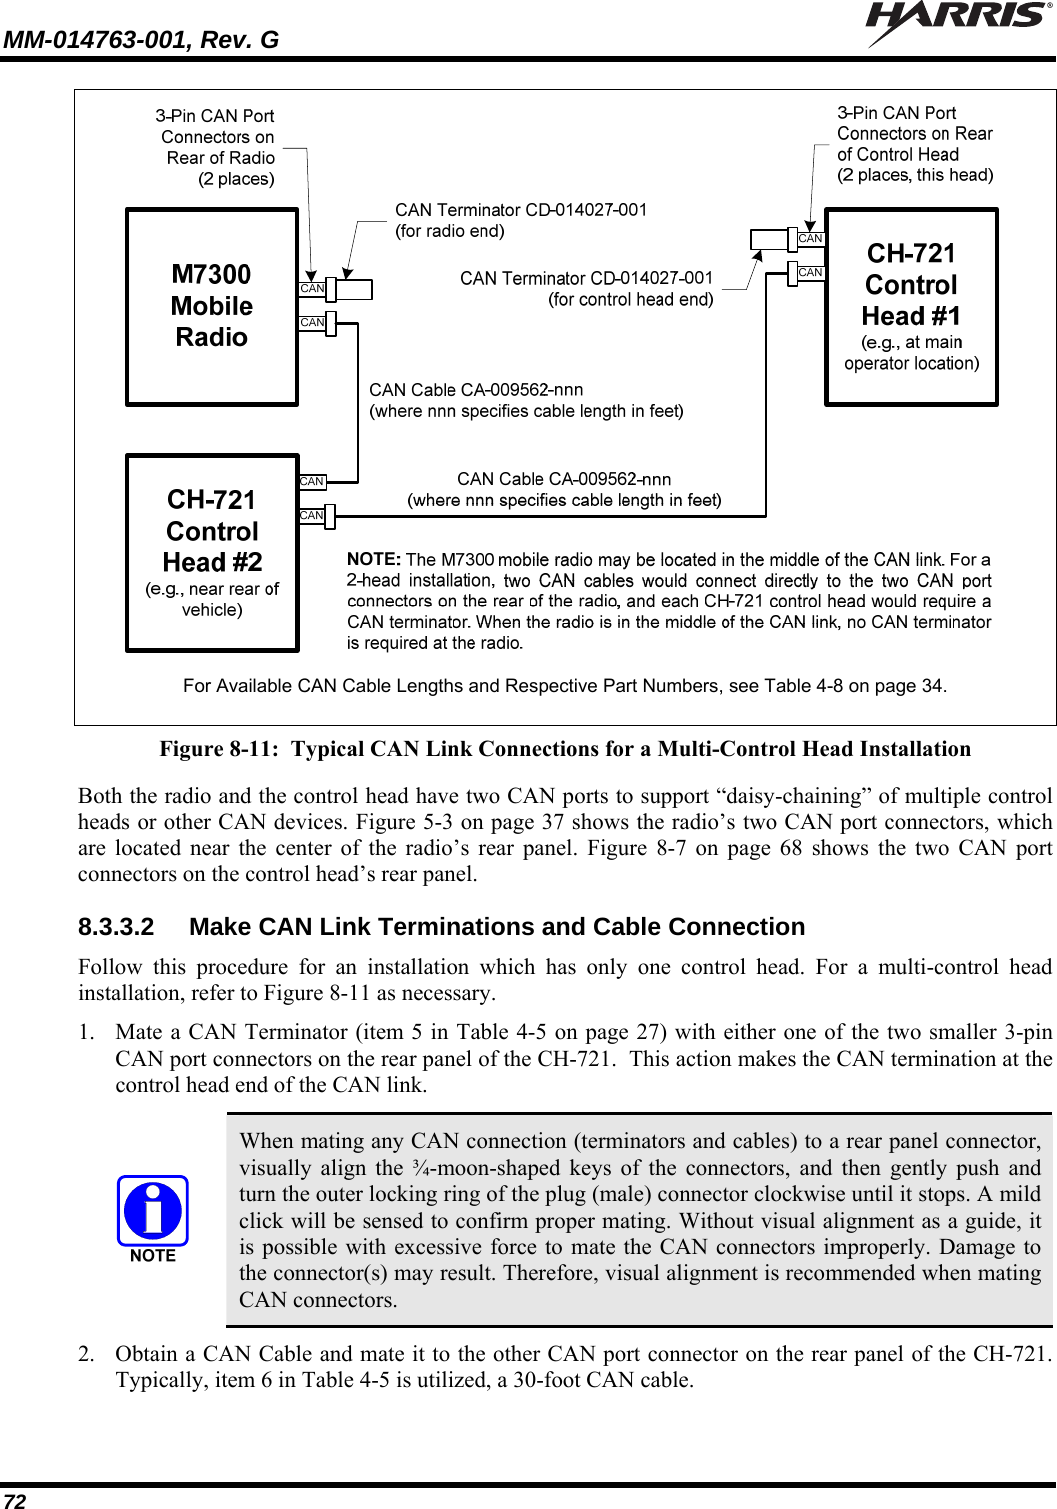 MM-014763-001, Rev. G   72  For Available CAN Cable Lengths and Respective Part Numbers, see Table 4-8 on page 34.  Figure 8-11:  Typical CAN Link Connections for a Multi-Control Head Installation Both the radio and the control head have two CAN ports to support “daisy-chaining” of multiple control heads or other CAN devices. Figure 5-3 on page 37 shows the radio’s two CAN port connectors, which are located near the center of the radio’s rear panel. Figure 8-7 on page 68 shows the two CAN port connectors on the control head’s rear panel. 8.3.3.2  Make CAN Link Terminations and Cable Connection Follow this procedure for an installation which has only one control head. For a multi-control head installation, refer to Figure 8-11 as necessary. 1. Mate a CAN Terminator (item 5 in Table 4-5 on page 27) with either one of the two smaller 3-pin CAN port connectors on the rear panel of the CH-721.  This action makes the CAN termination at the control head end of the CAN link.   When mating any CAN connection (terminators and cables) to a rear panel connector, visually align the ¾-moon-shaped keys of the connectors, and then gently push and turn the outer locking ring of the plug (male) connector clockwise until it stops. A mild click will be sensed to confirm proper mating. Without visual alignment as a guide, it is possible with excessive force to mate the CAN connectors improperly. Damage to the connector(s) may result. Therefore, visual alignment is recommended when mating CAN connectors. 2. Obtain a CAN Cable and mate it to the other CAN port connector on the rear panel of the CH-721. Typically, item 6 in Table 4-5 is utilized, a 30-foot CAN cable. 